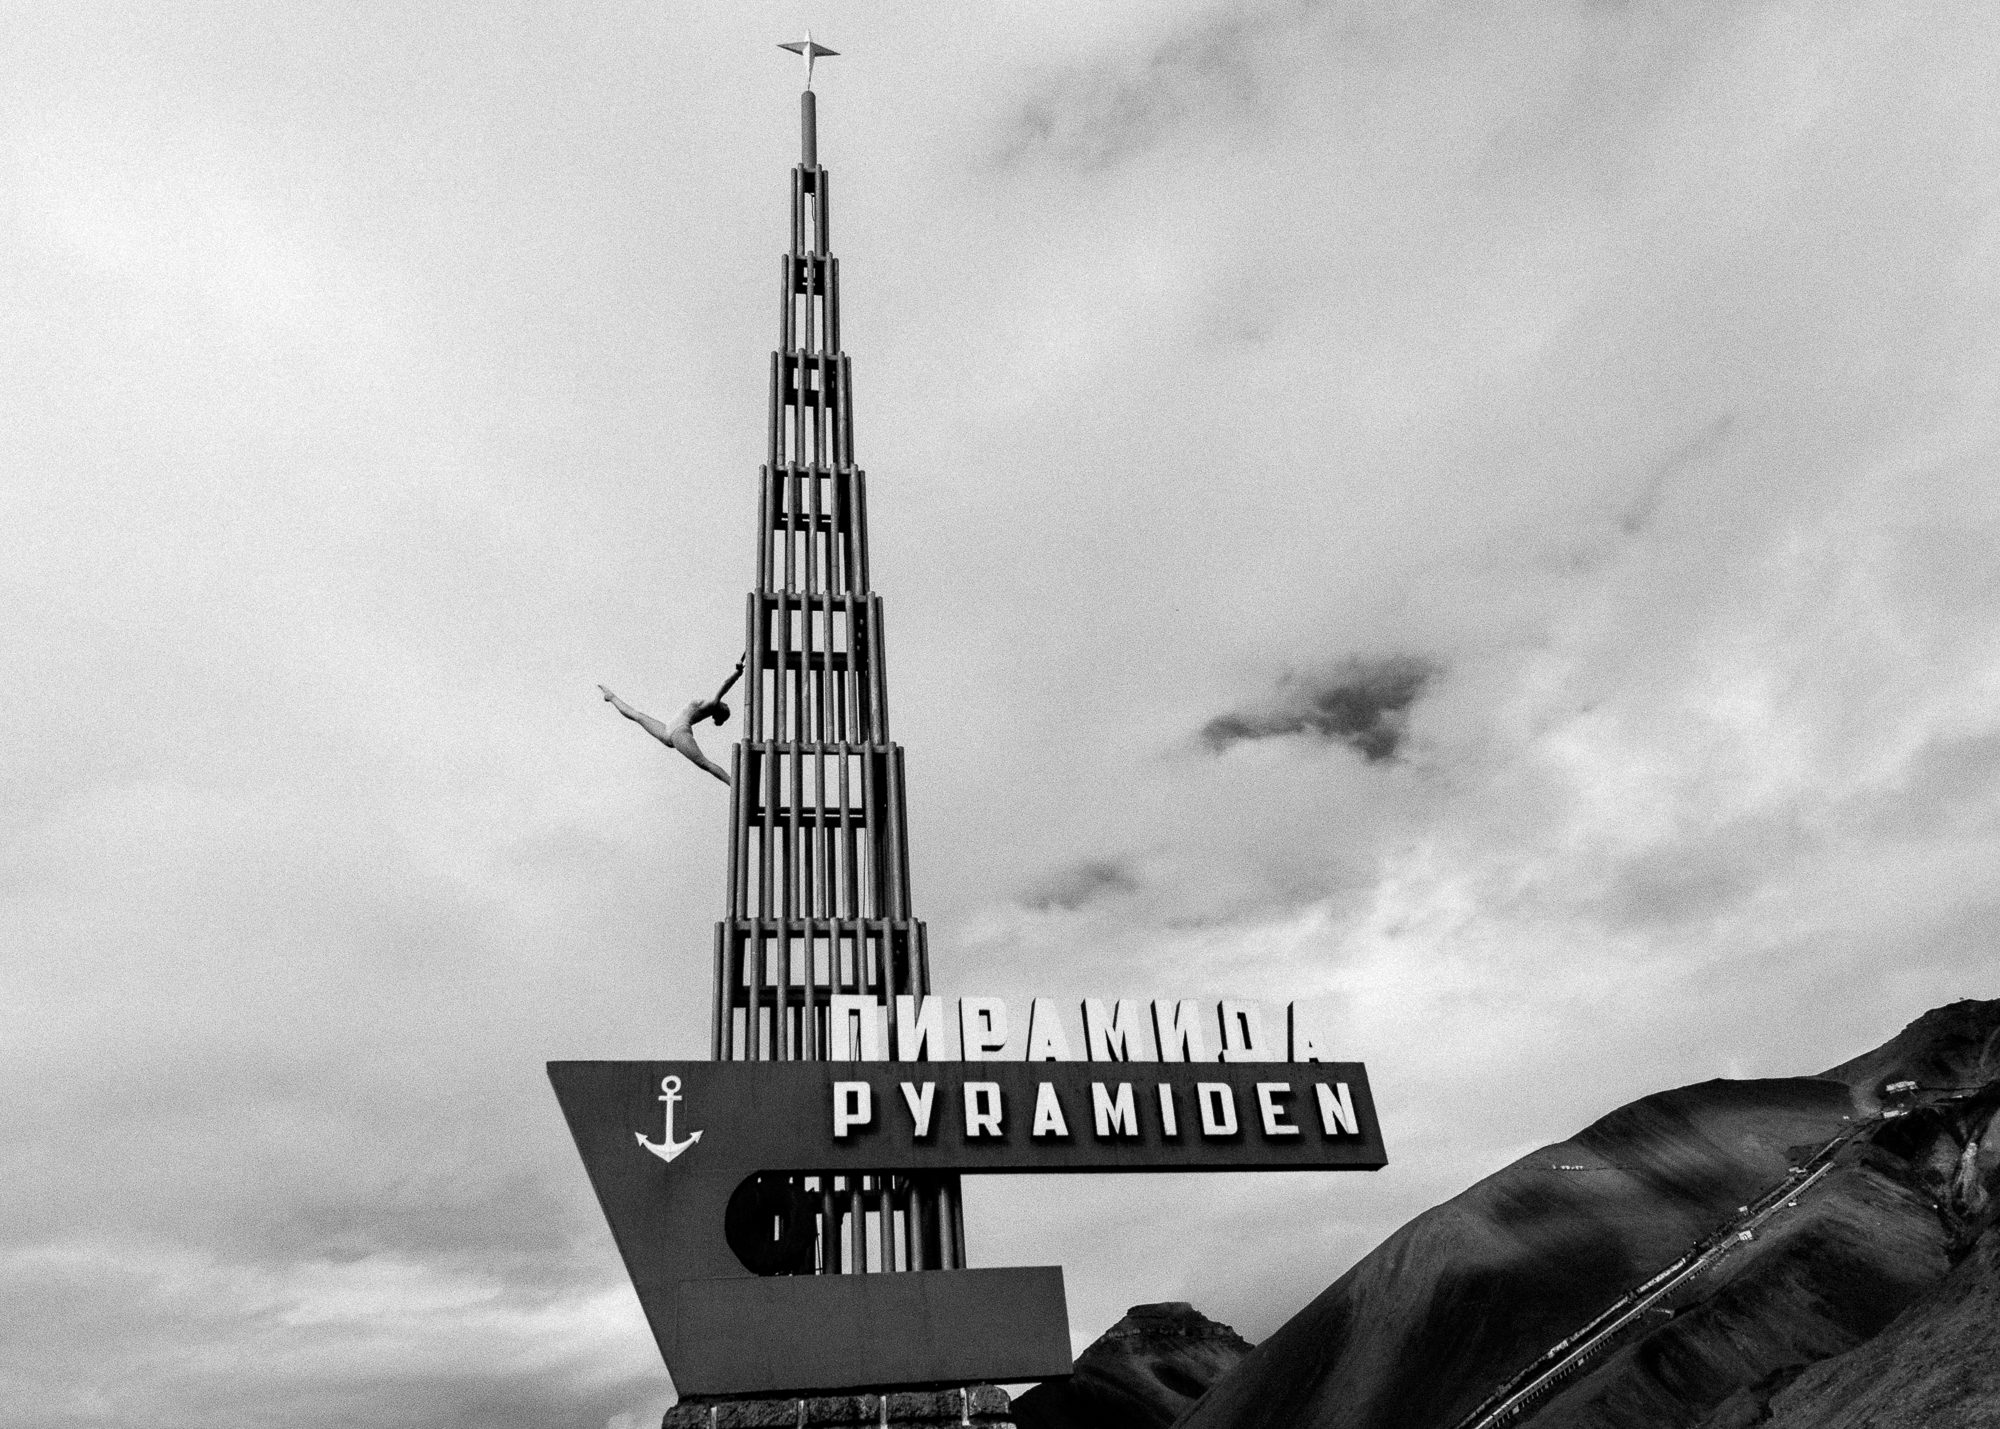 pyramiden, svalbard, photo art, photo art gallery, art for sale, photo for sale, black and white